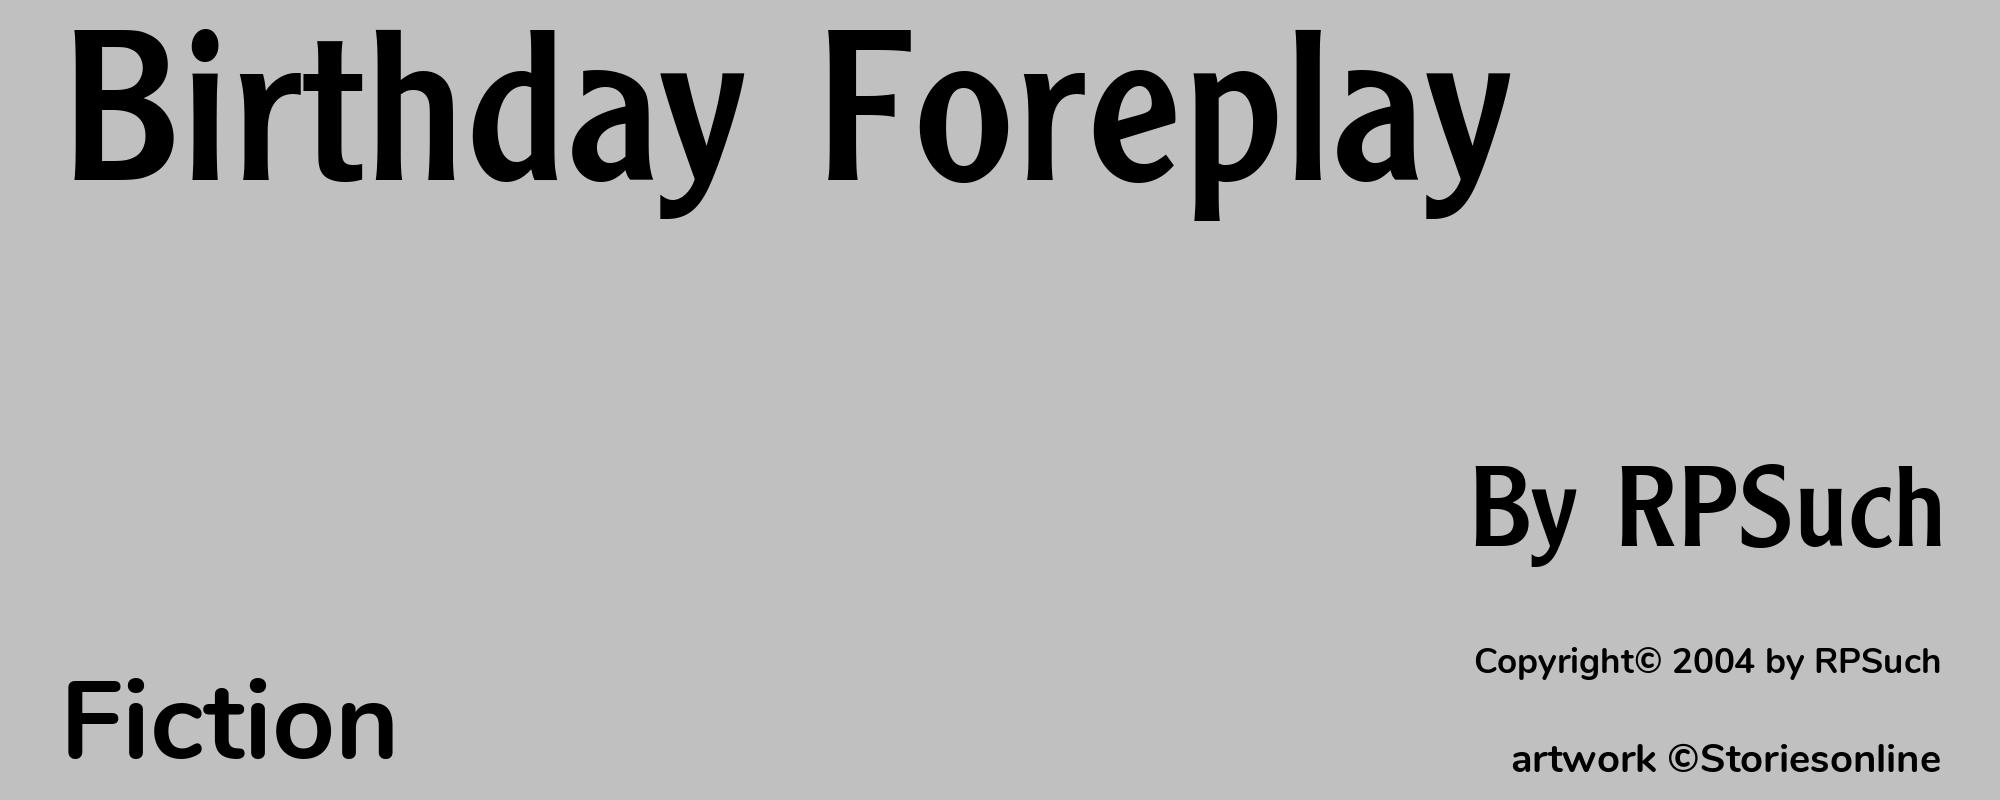 Birthday Foreplay - Cover